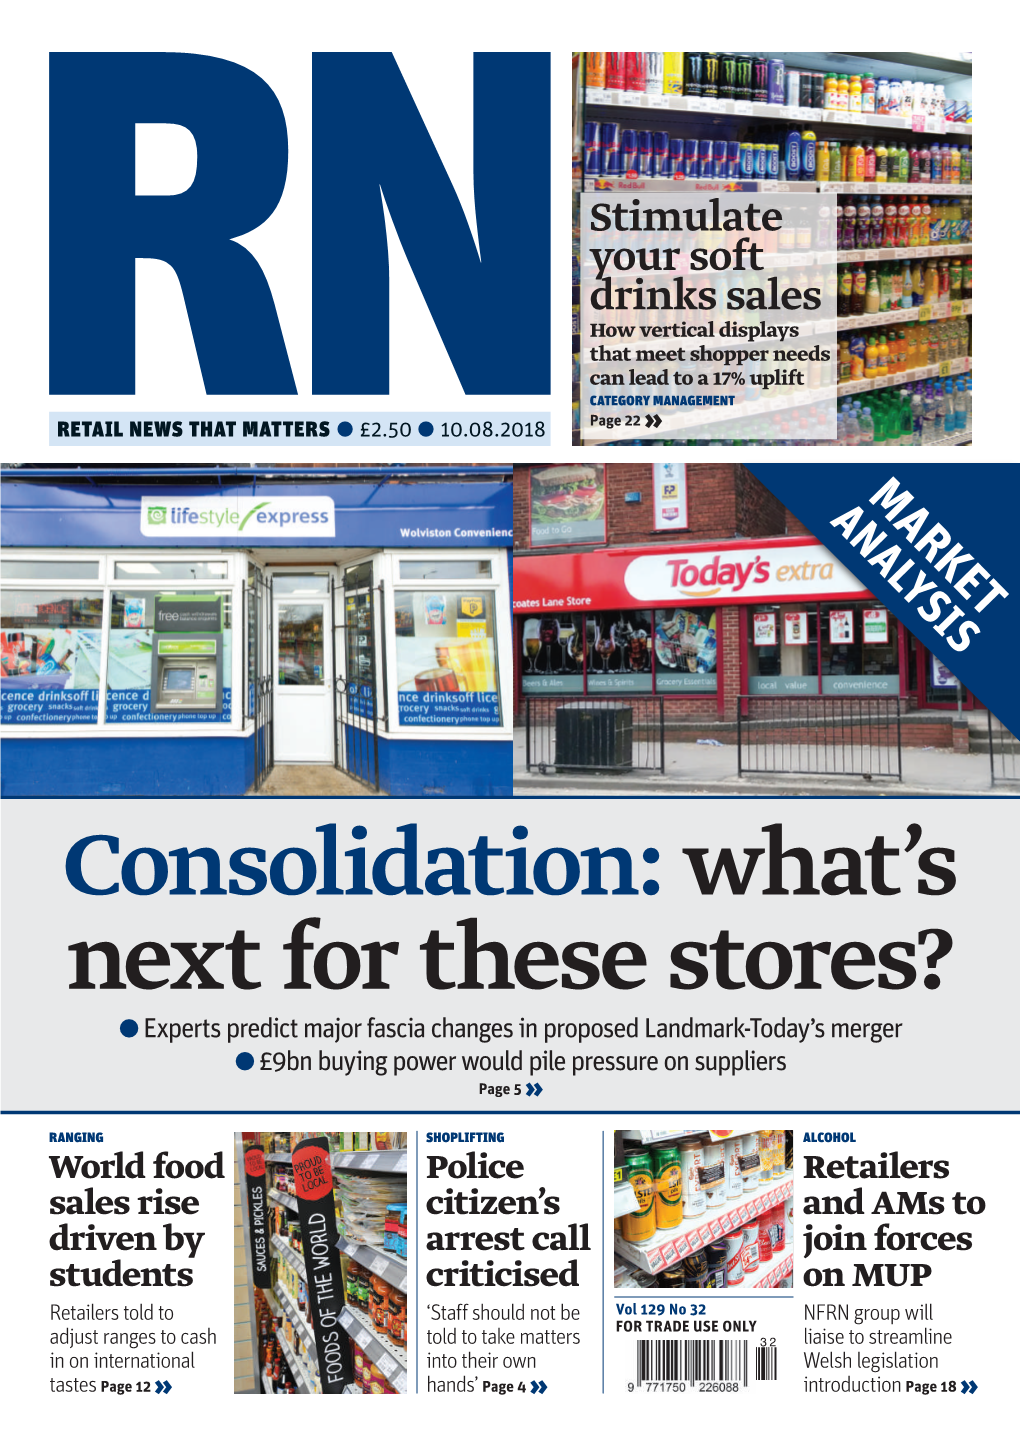 Consolidation:What's Next for These Stores?